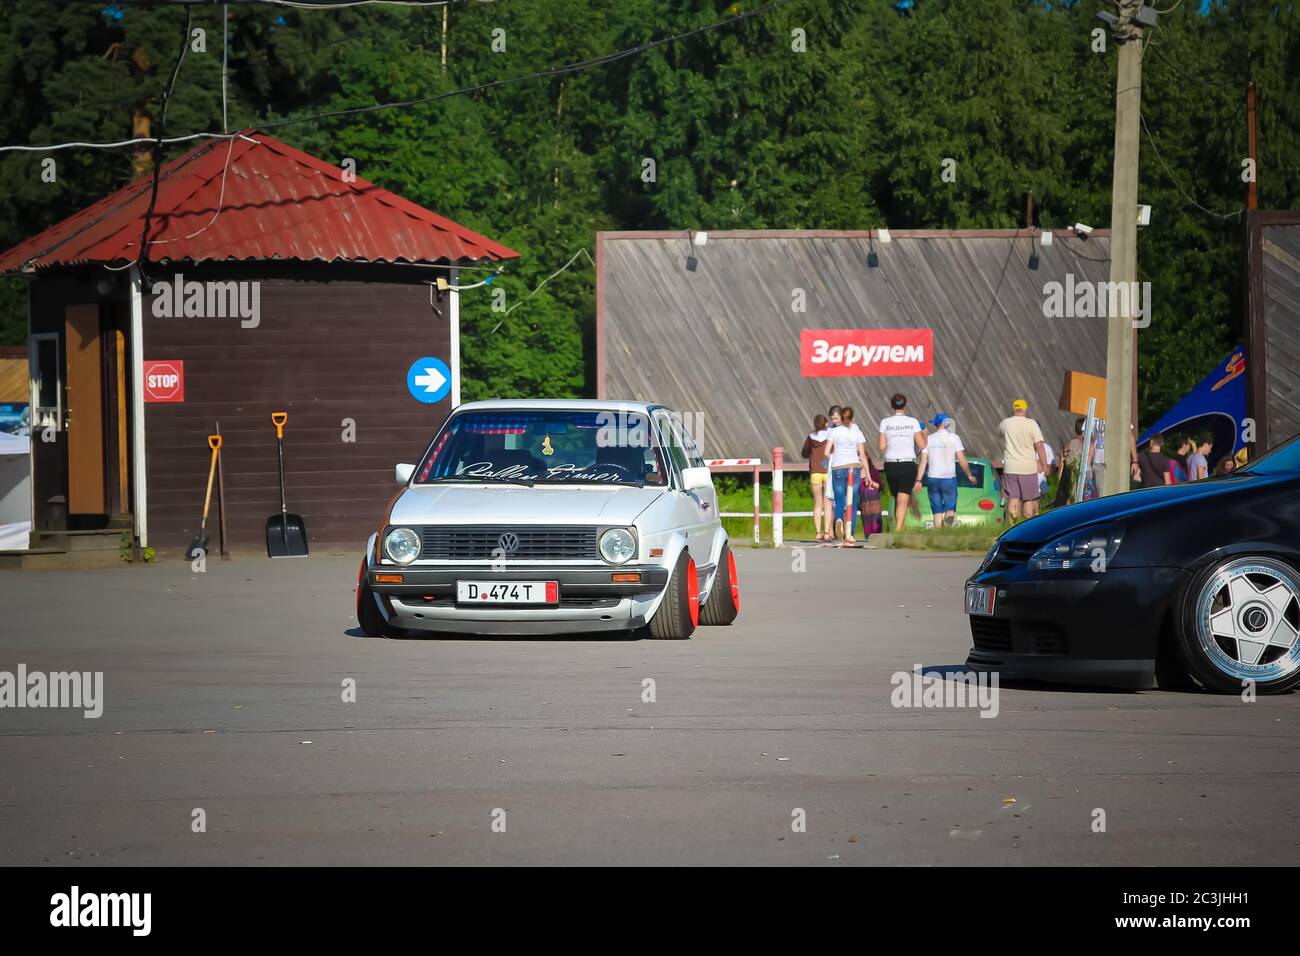 Moscow. Russia - May 20, 2019: White tuned in Stance style Volkswagen Golf mk 1. Low car with wide red wheels parked on the street. Cult and legendary Stock Photo